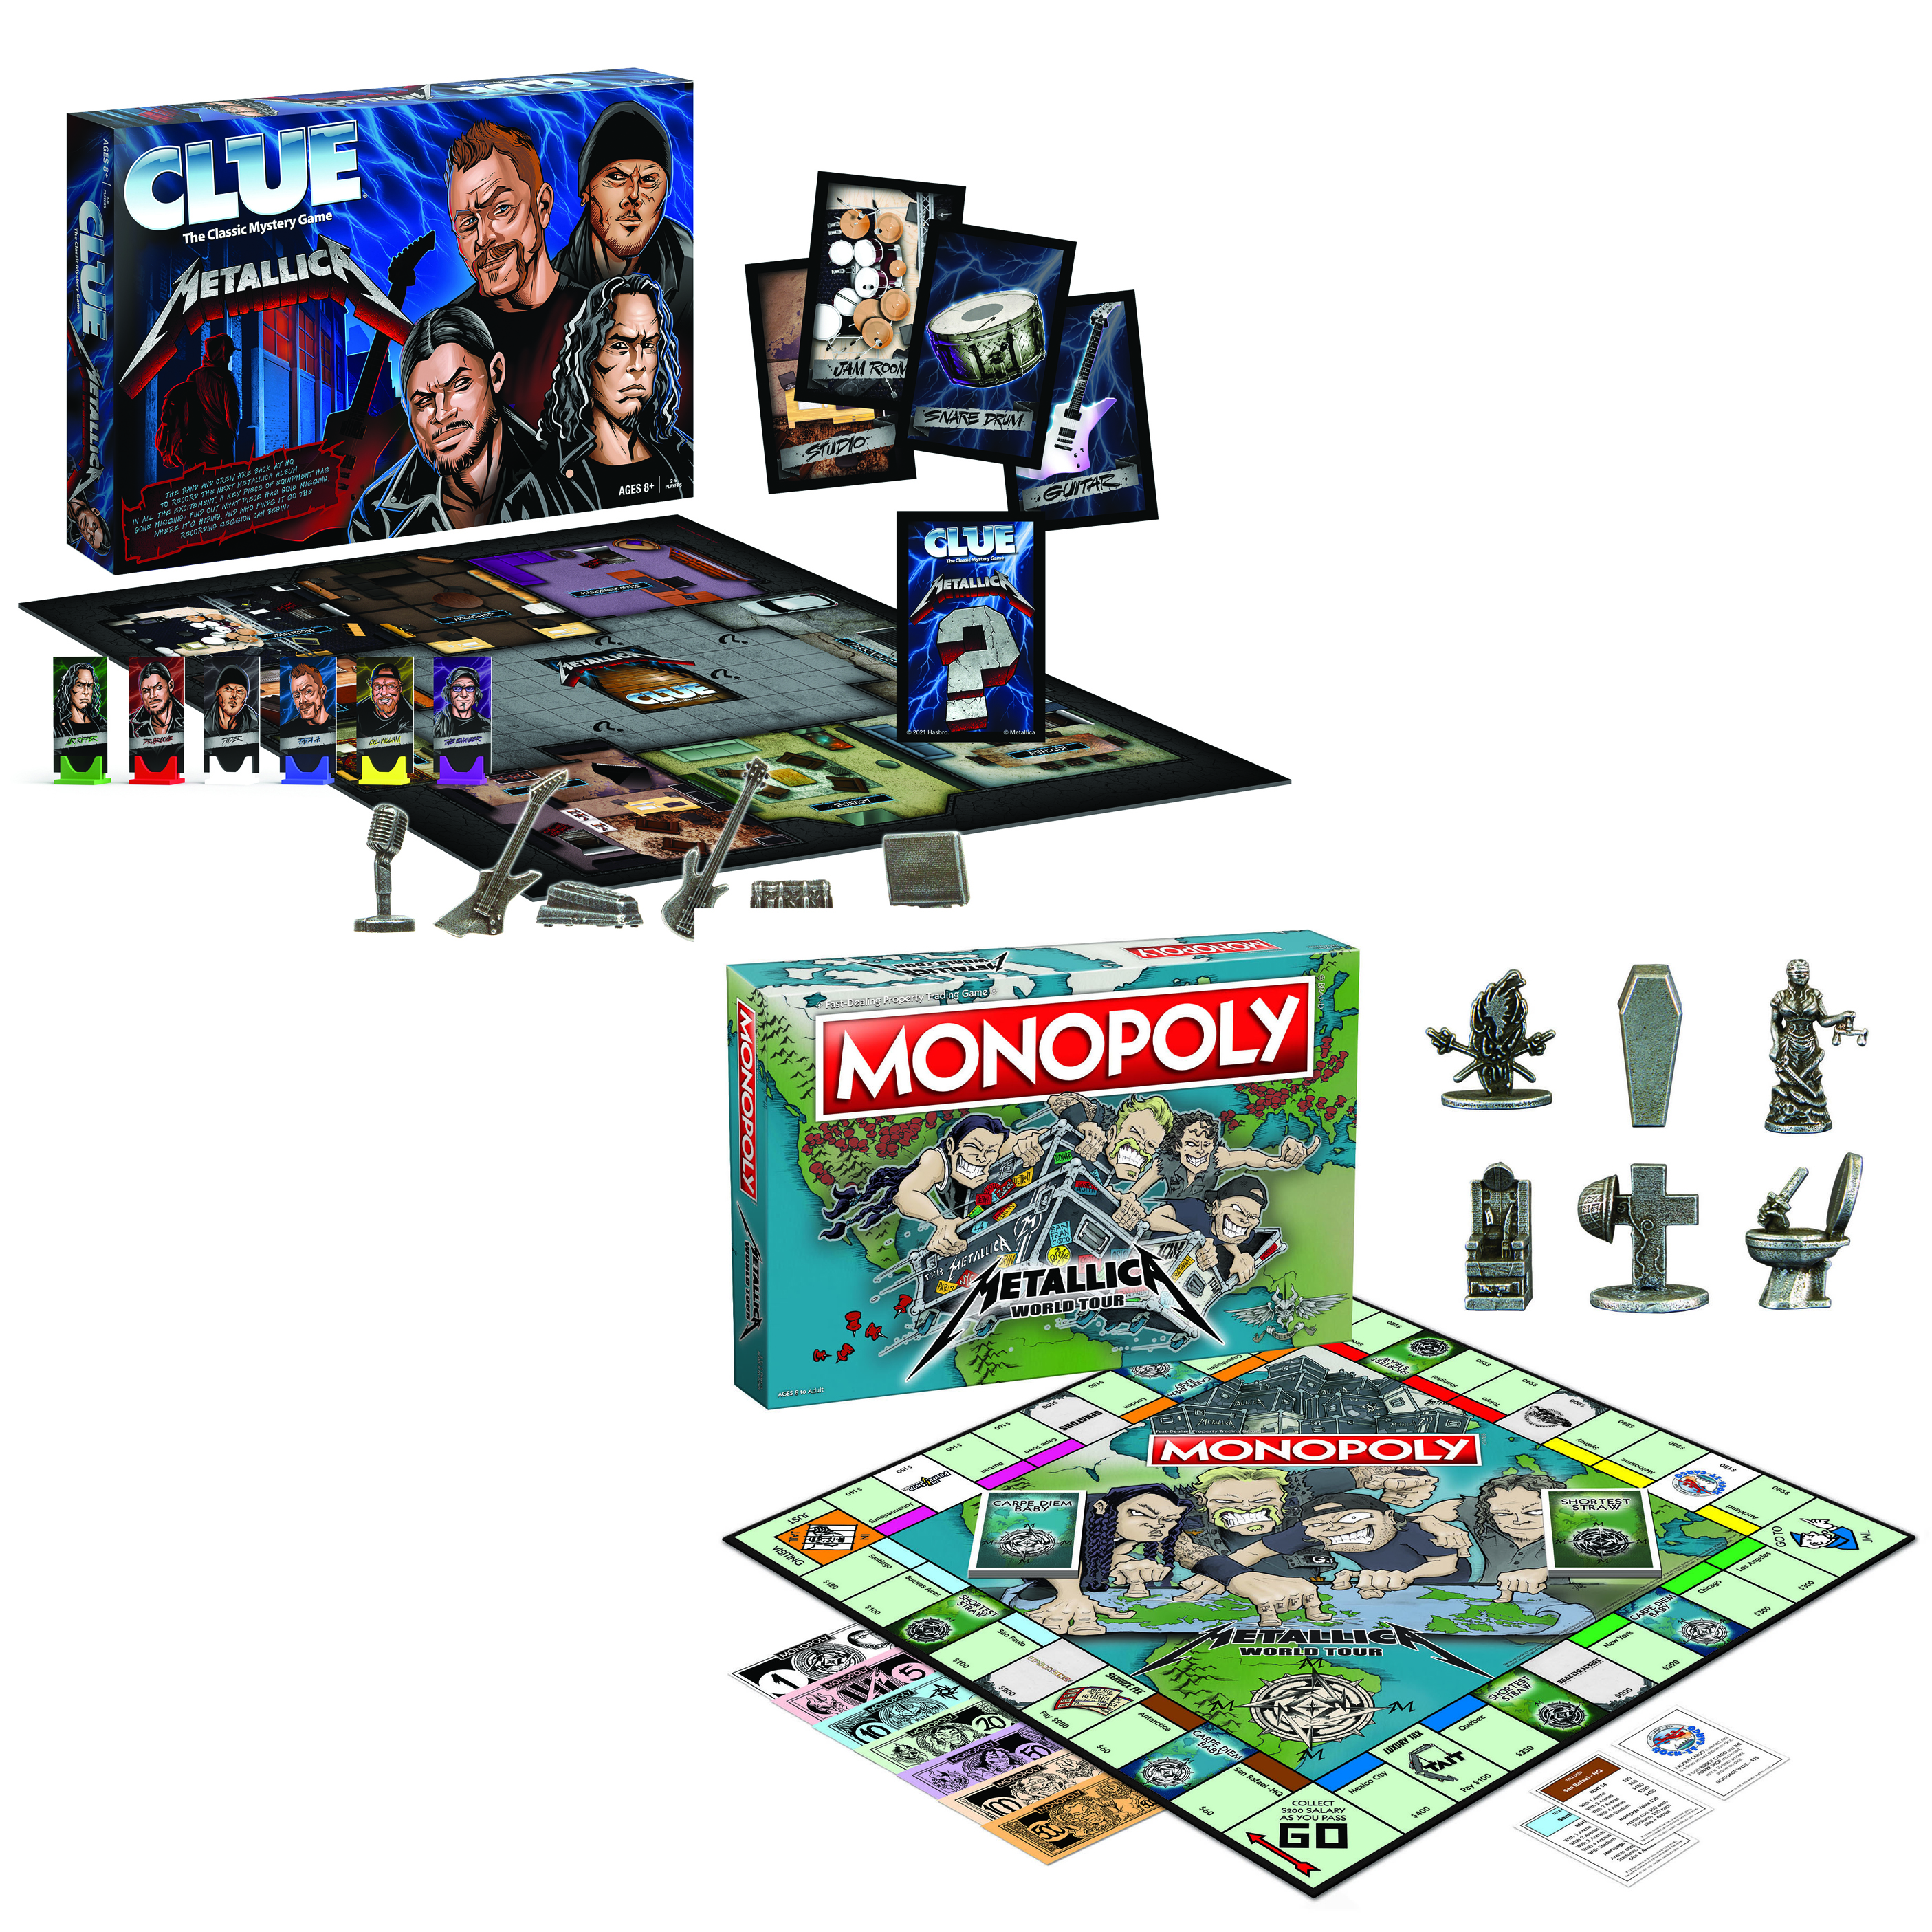 Cluedo - Édition Menteurs - Buy your Board games in family